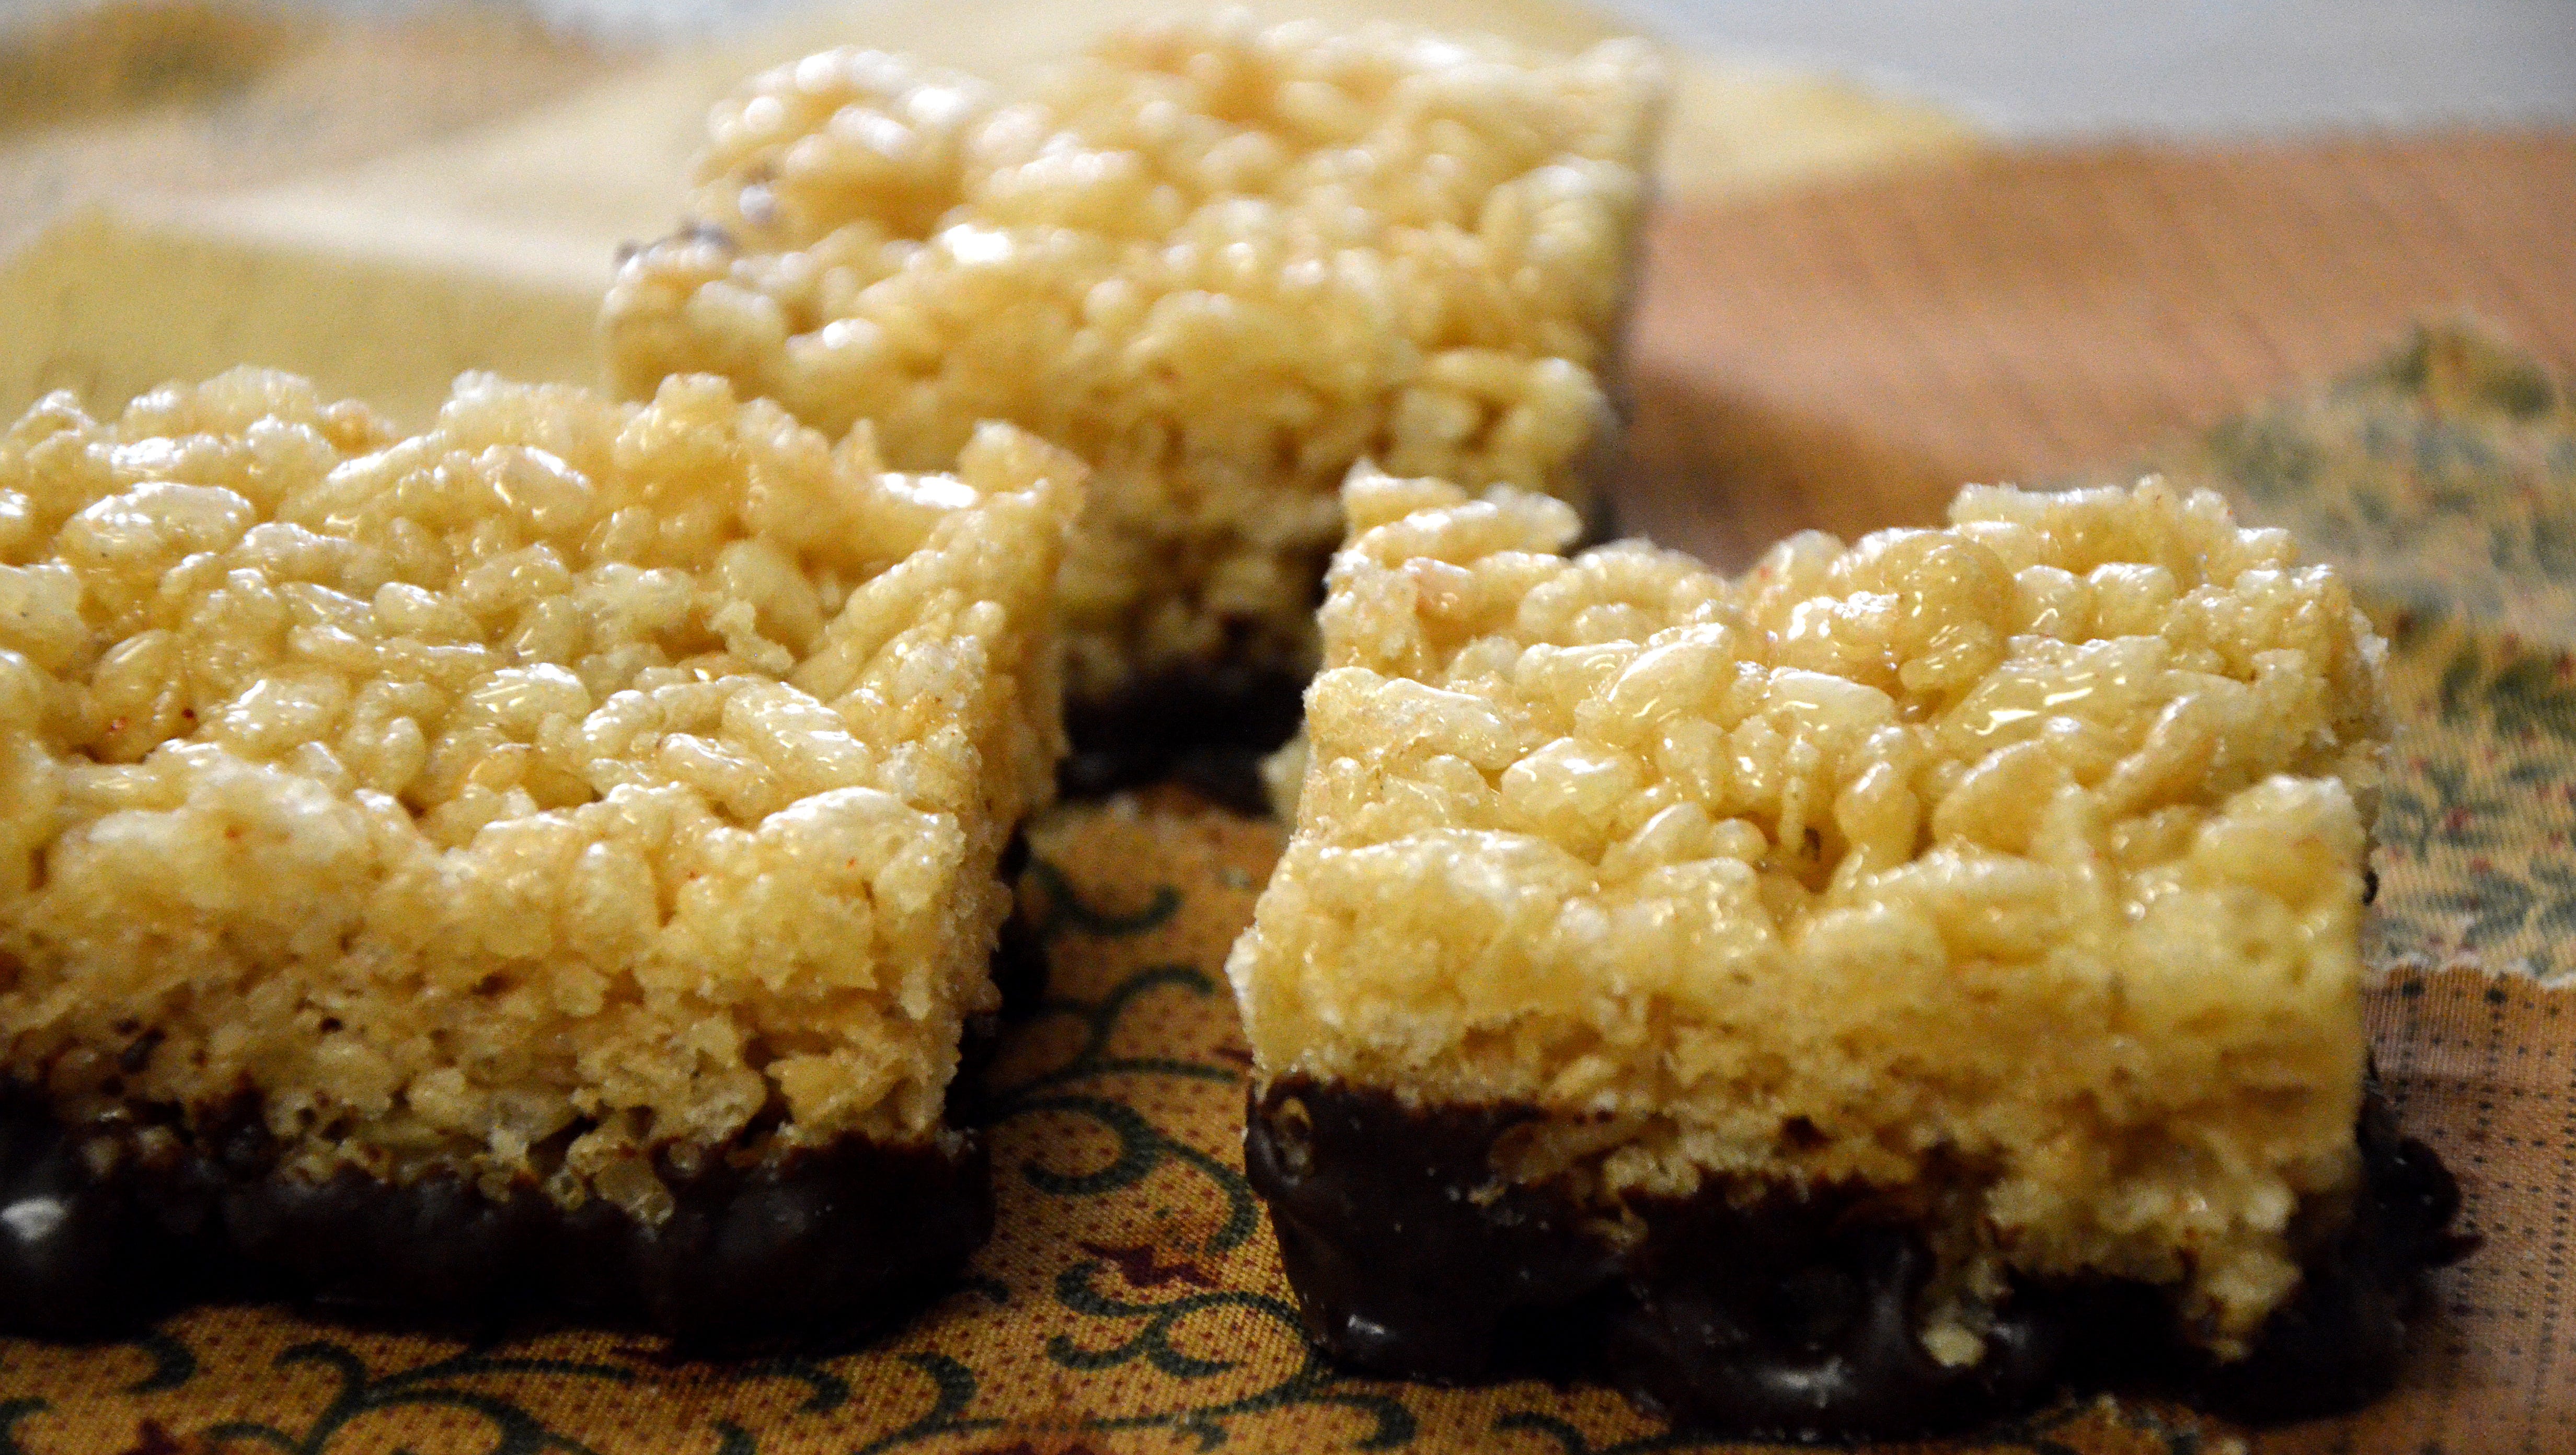 The 80-year journey of the Rice Krispies treat